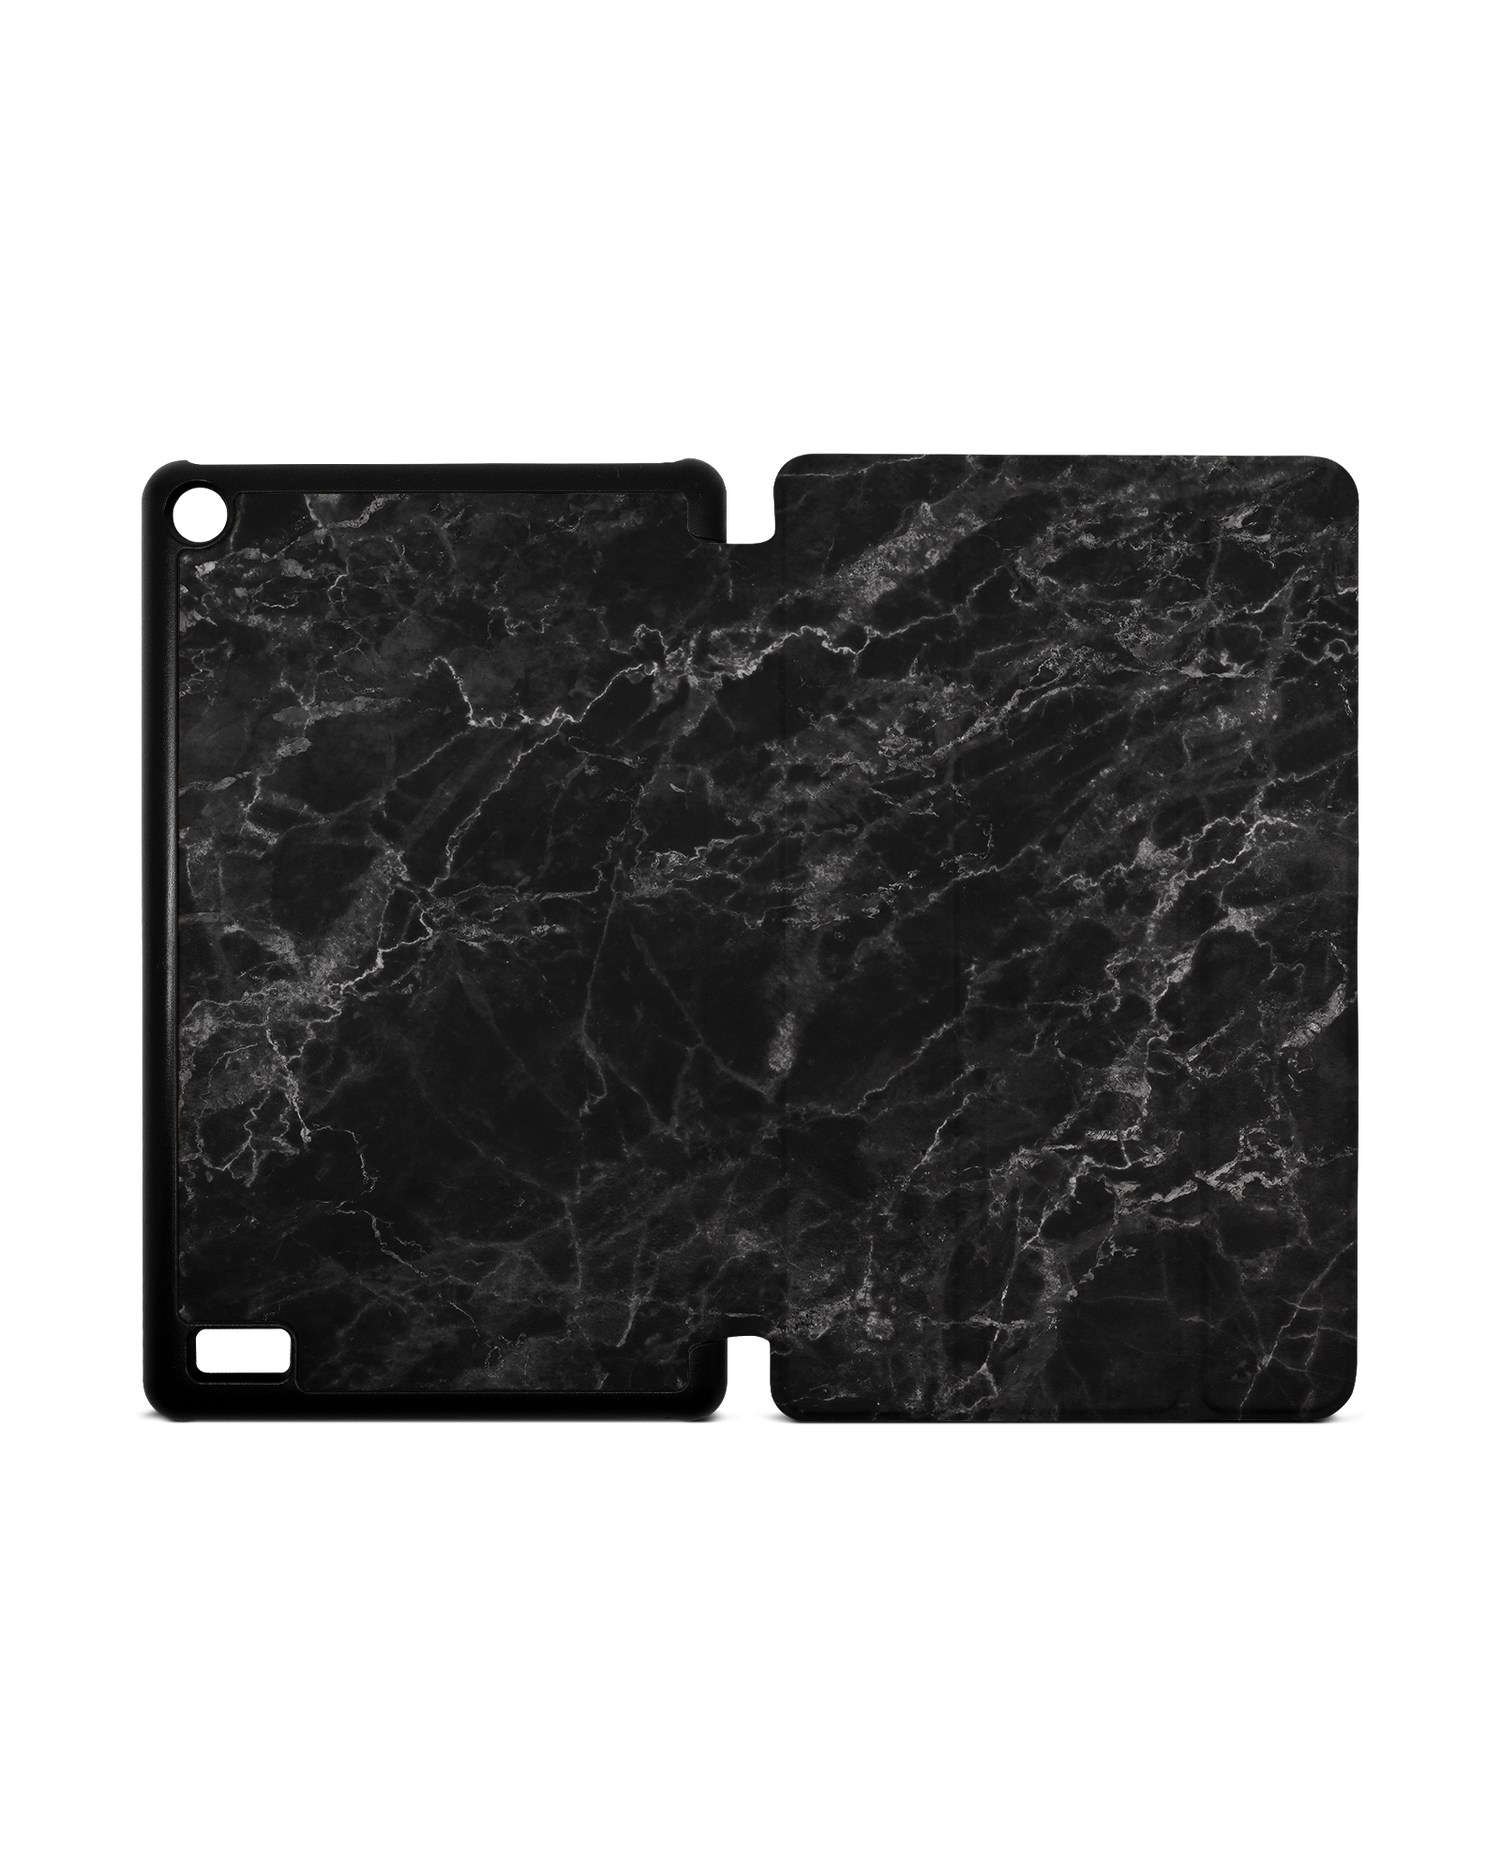 Midnight Marble Tablet Smart Case for Amazon Fire 7: Opened